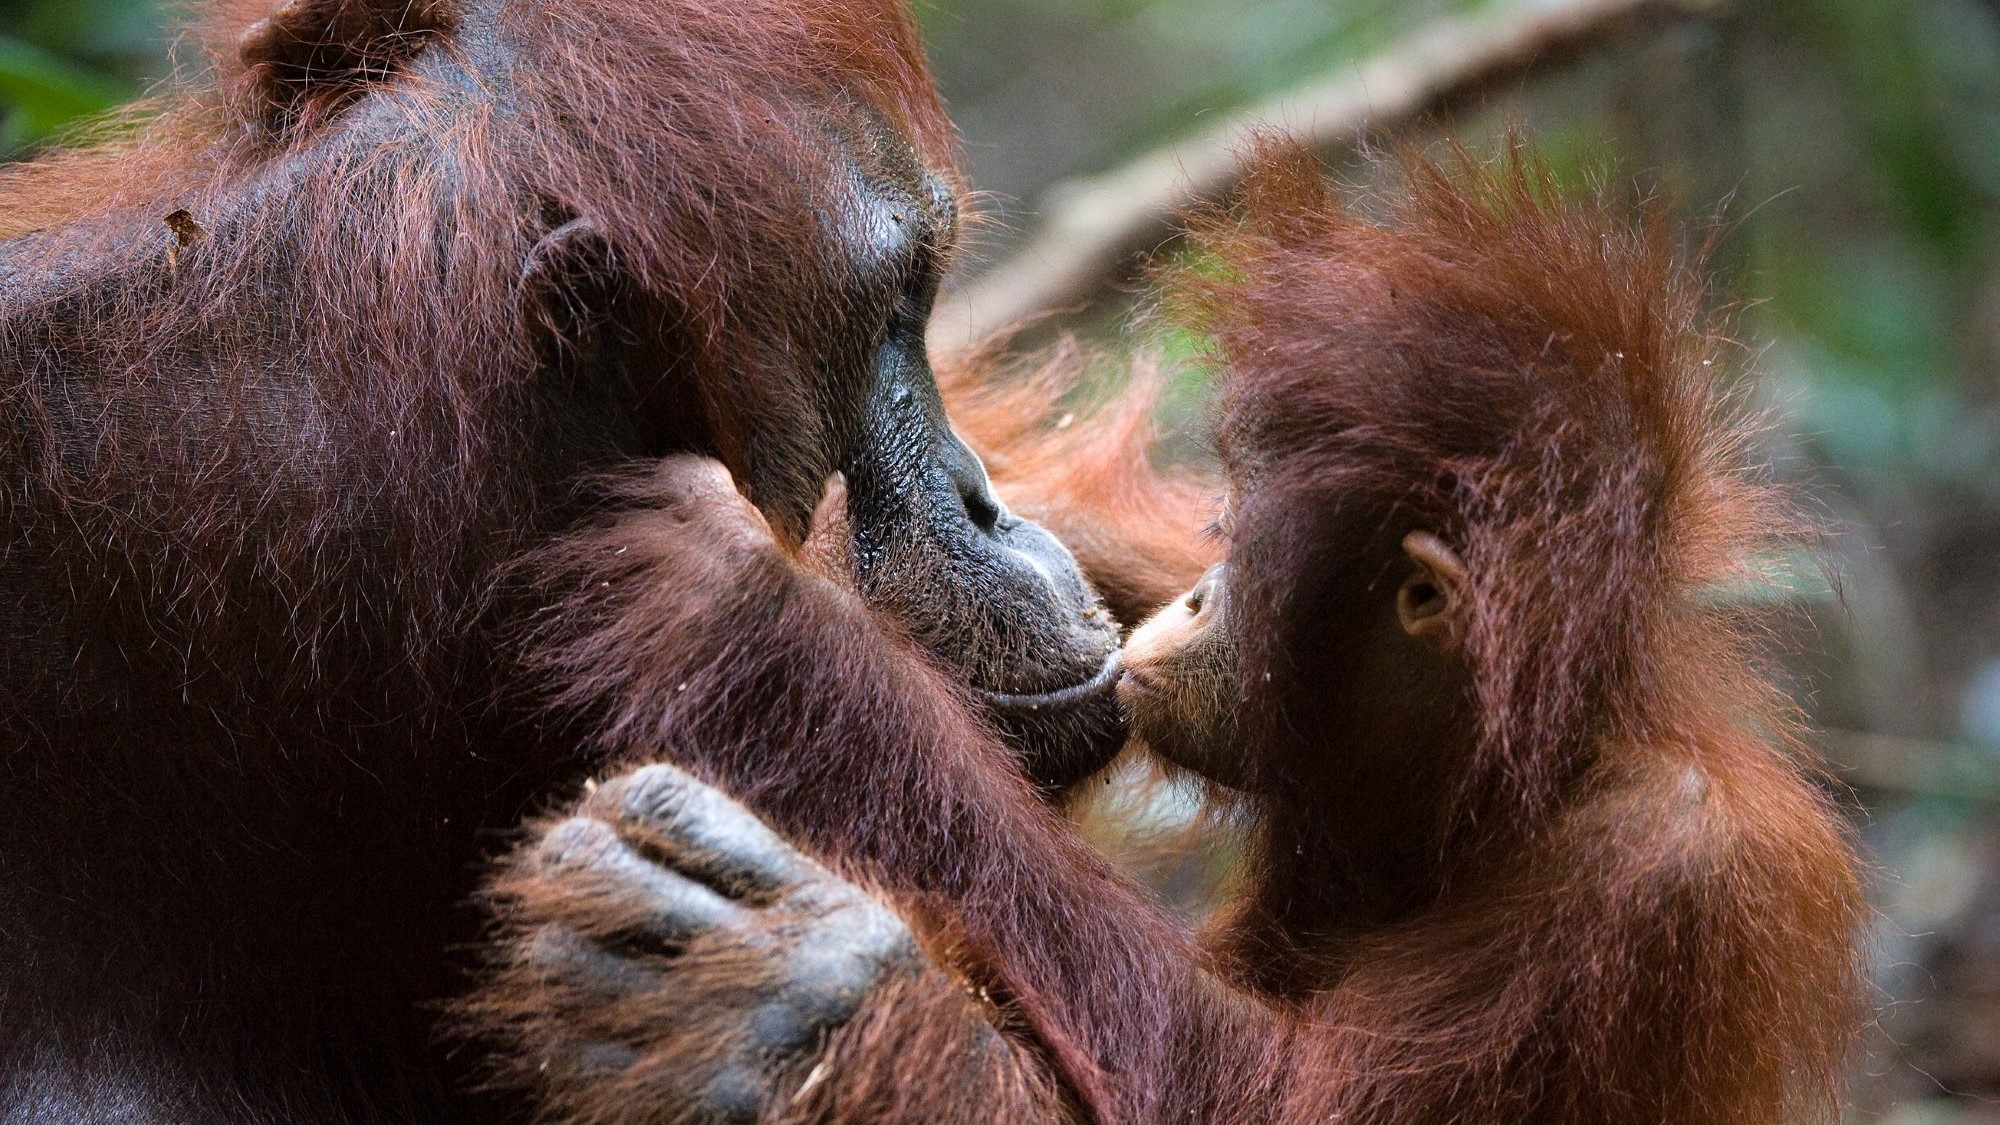 This young orangutan can rely on its mom to supply breast milk for up to eight years.